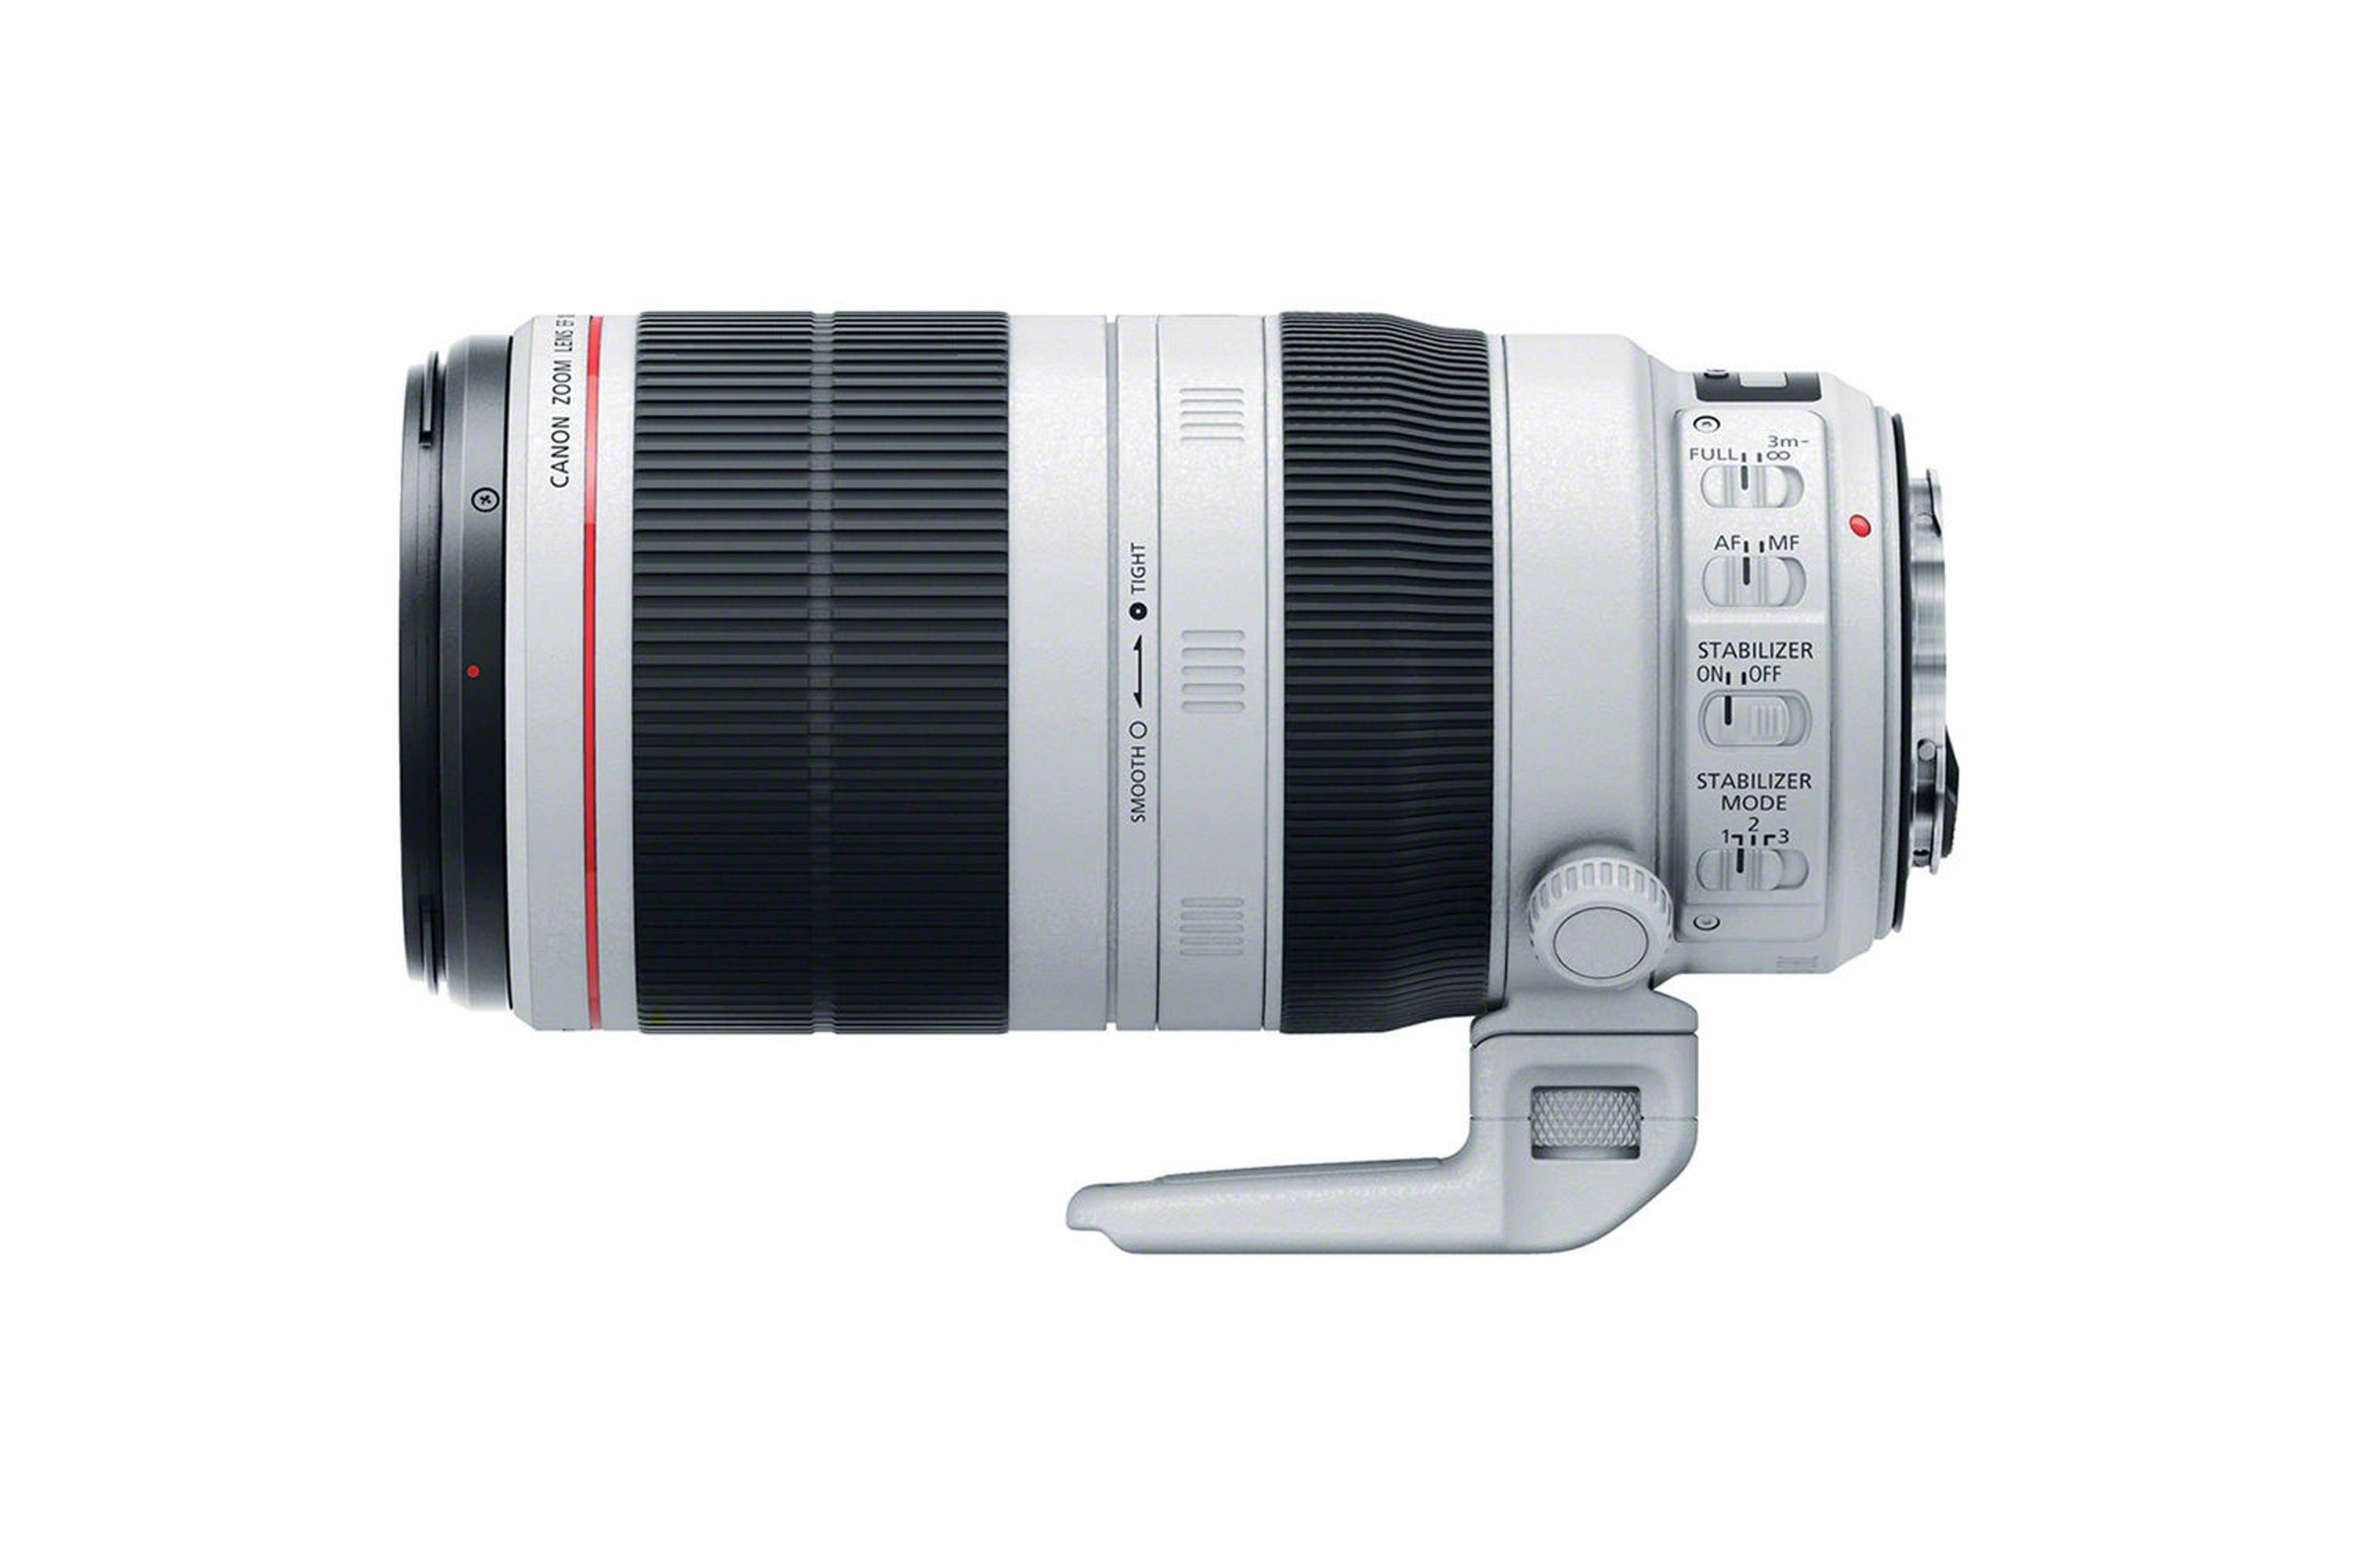 Canon zoomlens EF 100-400 mm 1:4.5-5.6L IS II USM Canon zoomlens EF 100-400 mm 1:4.5-5.6L IS II USM